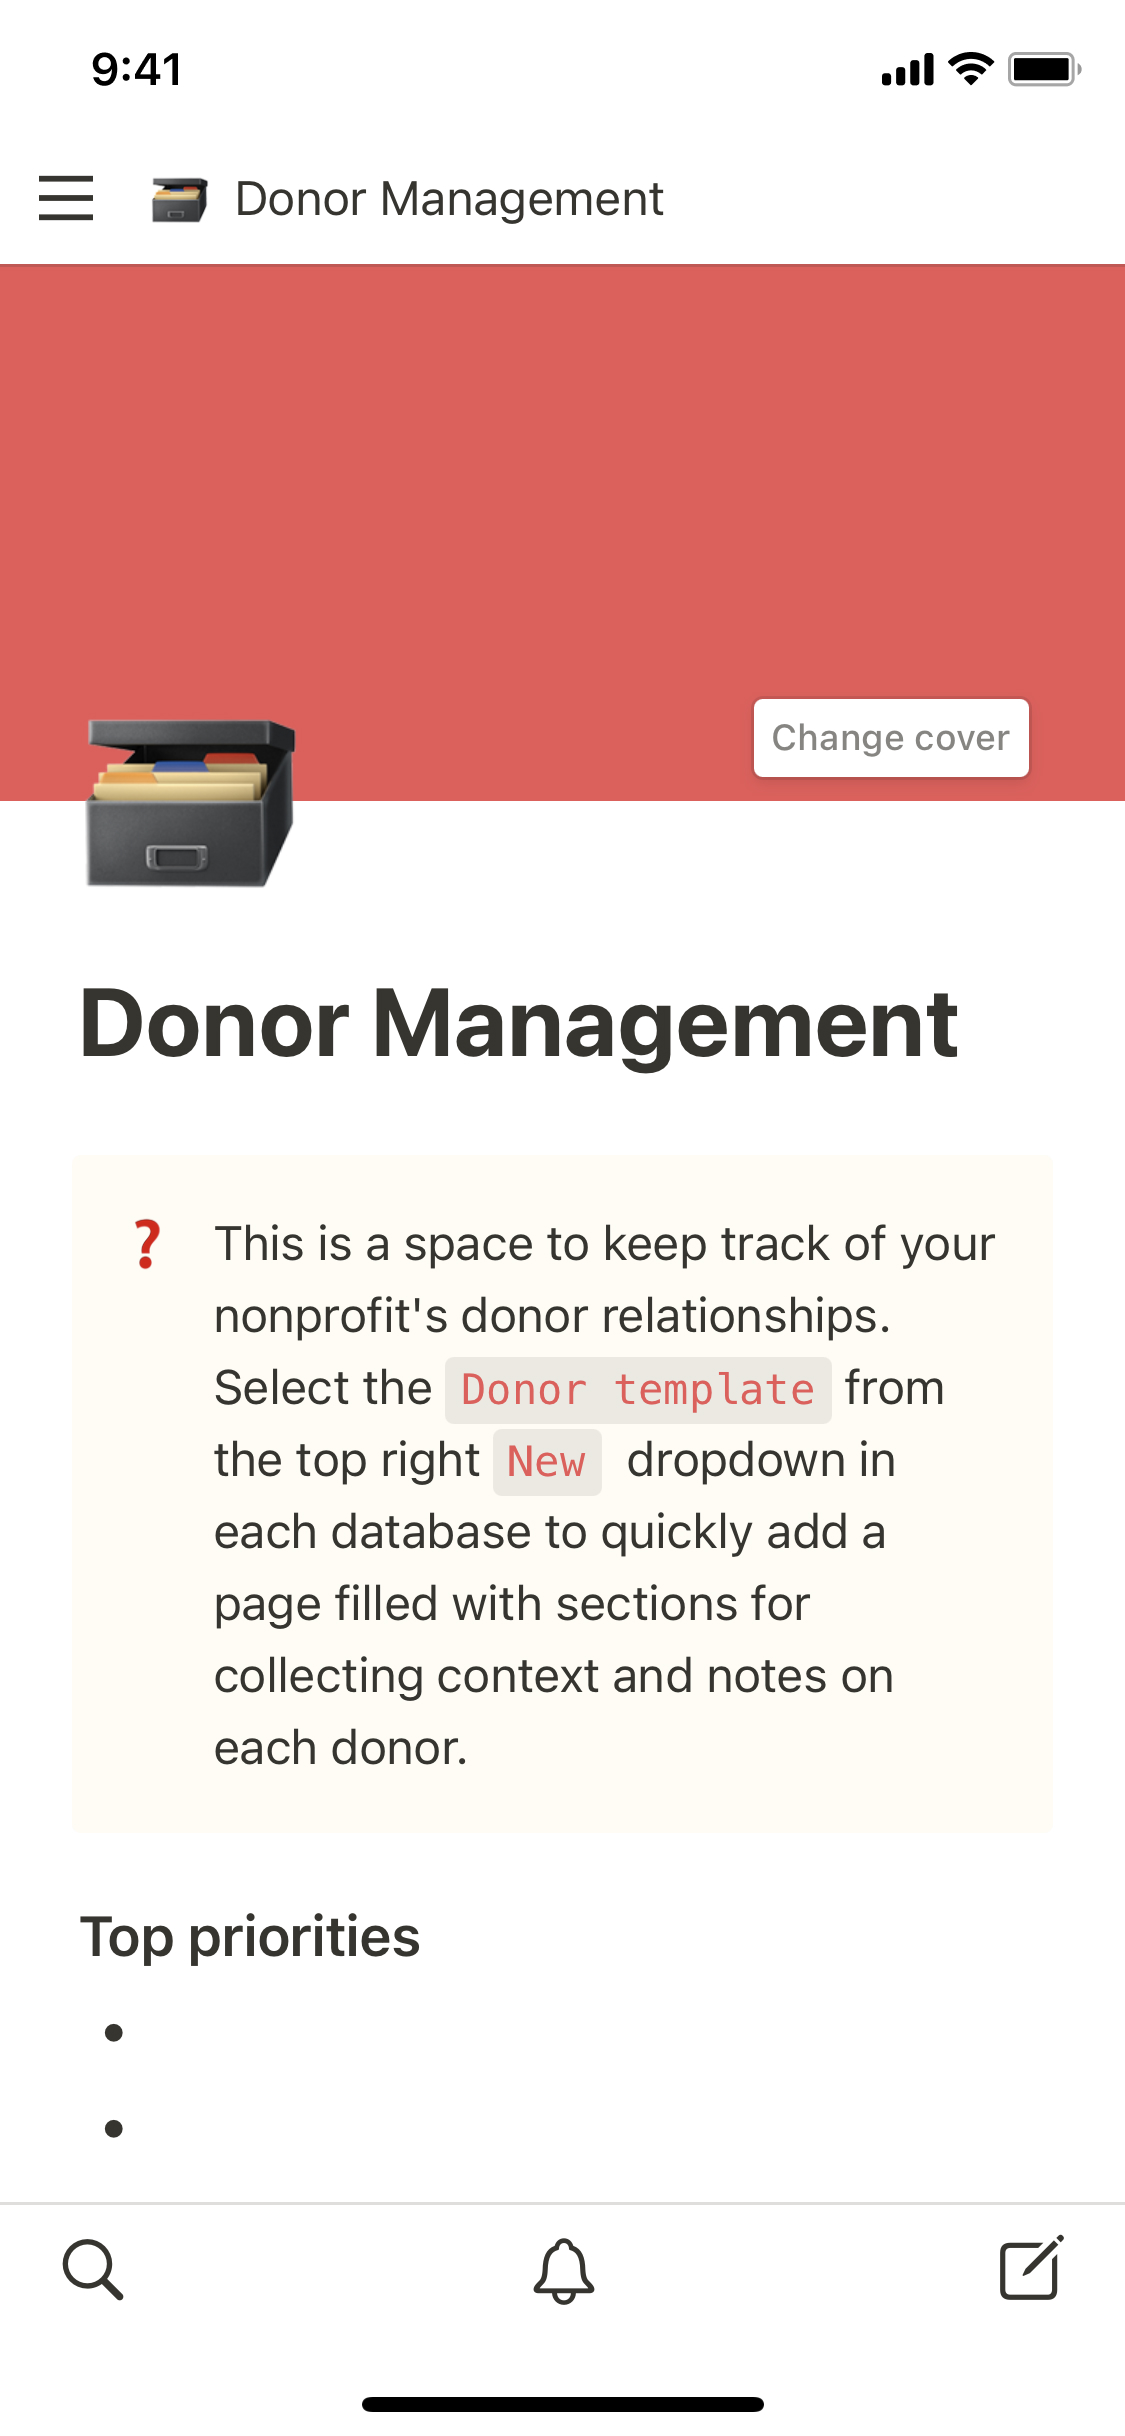 The mobile image for the Donor management template